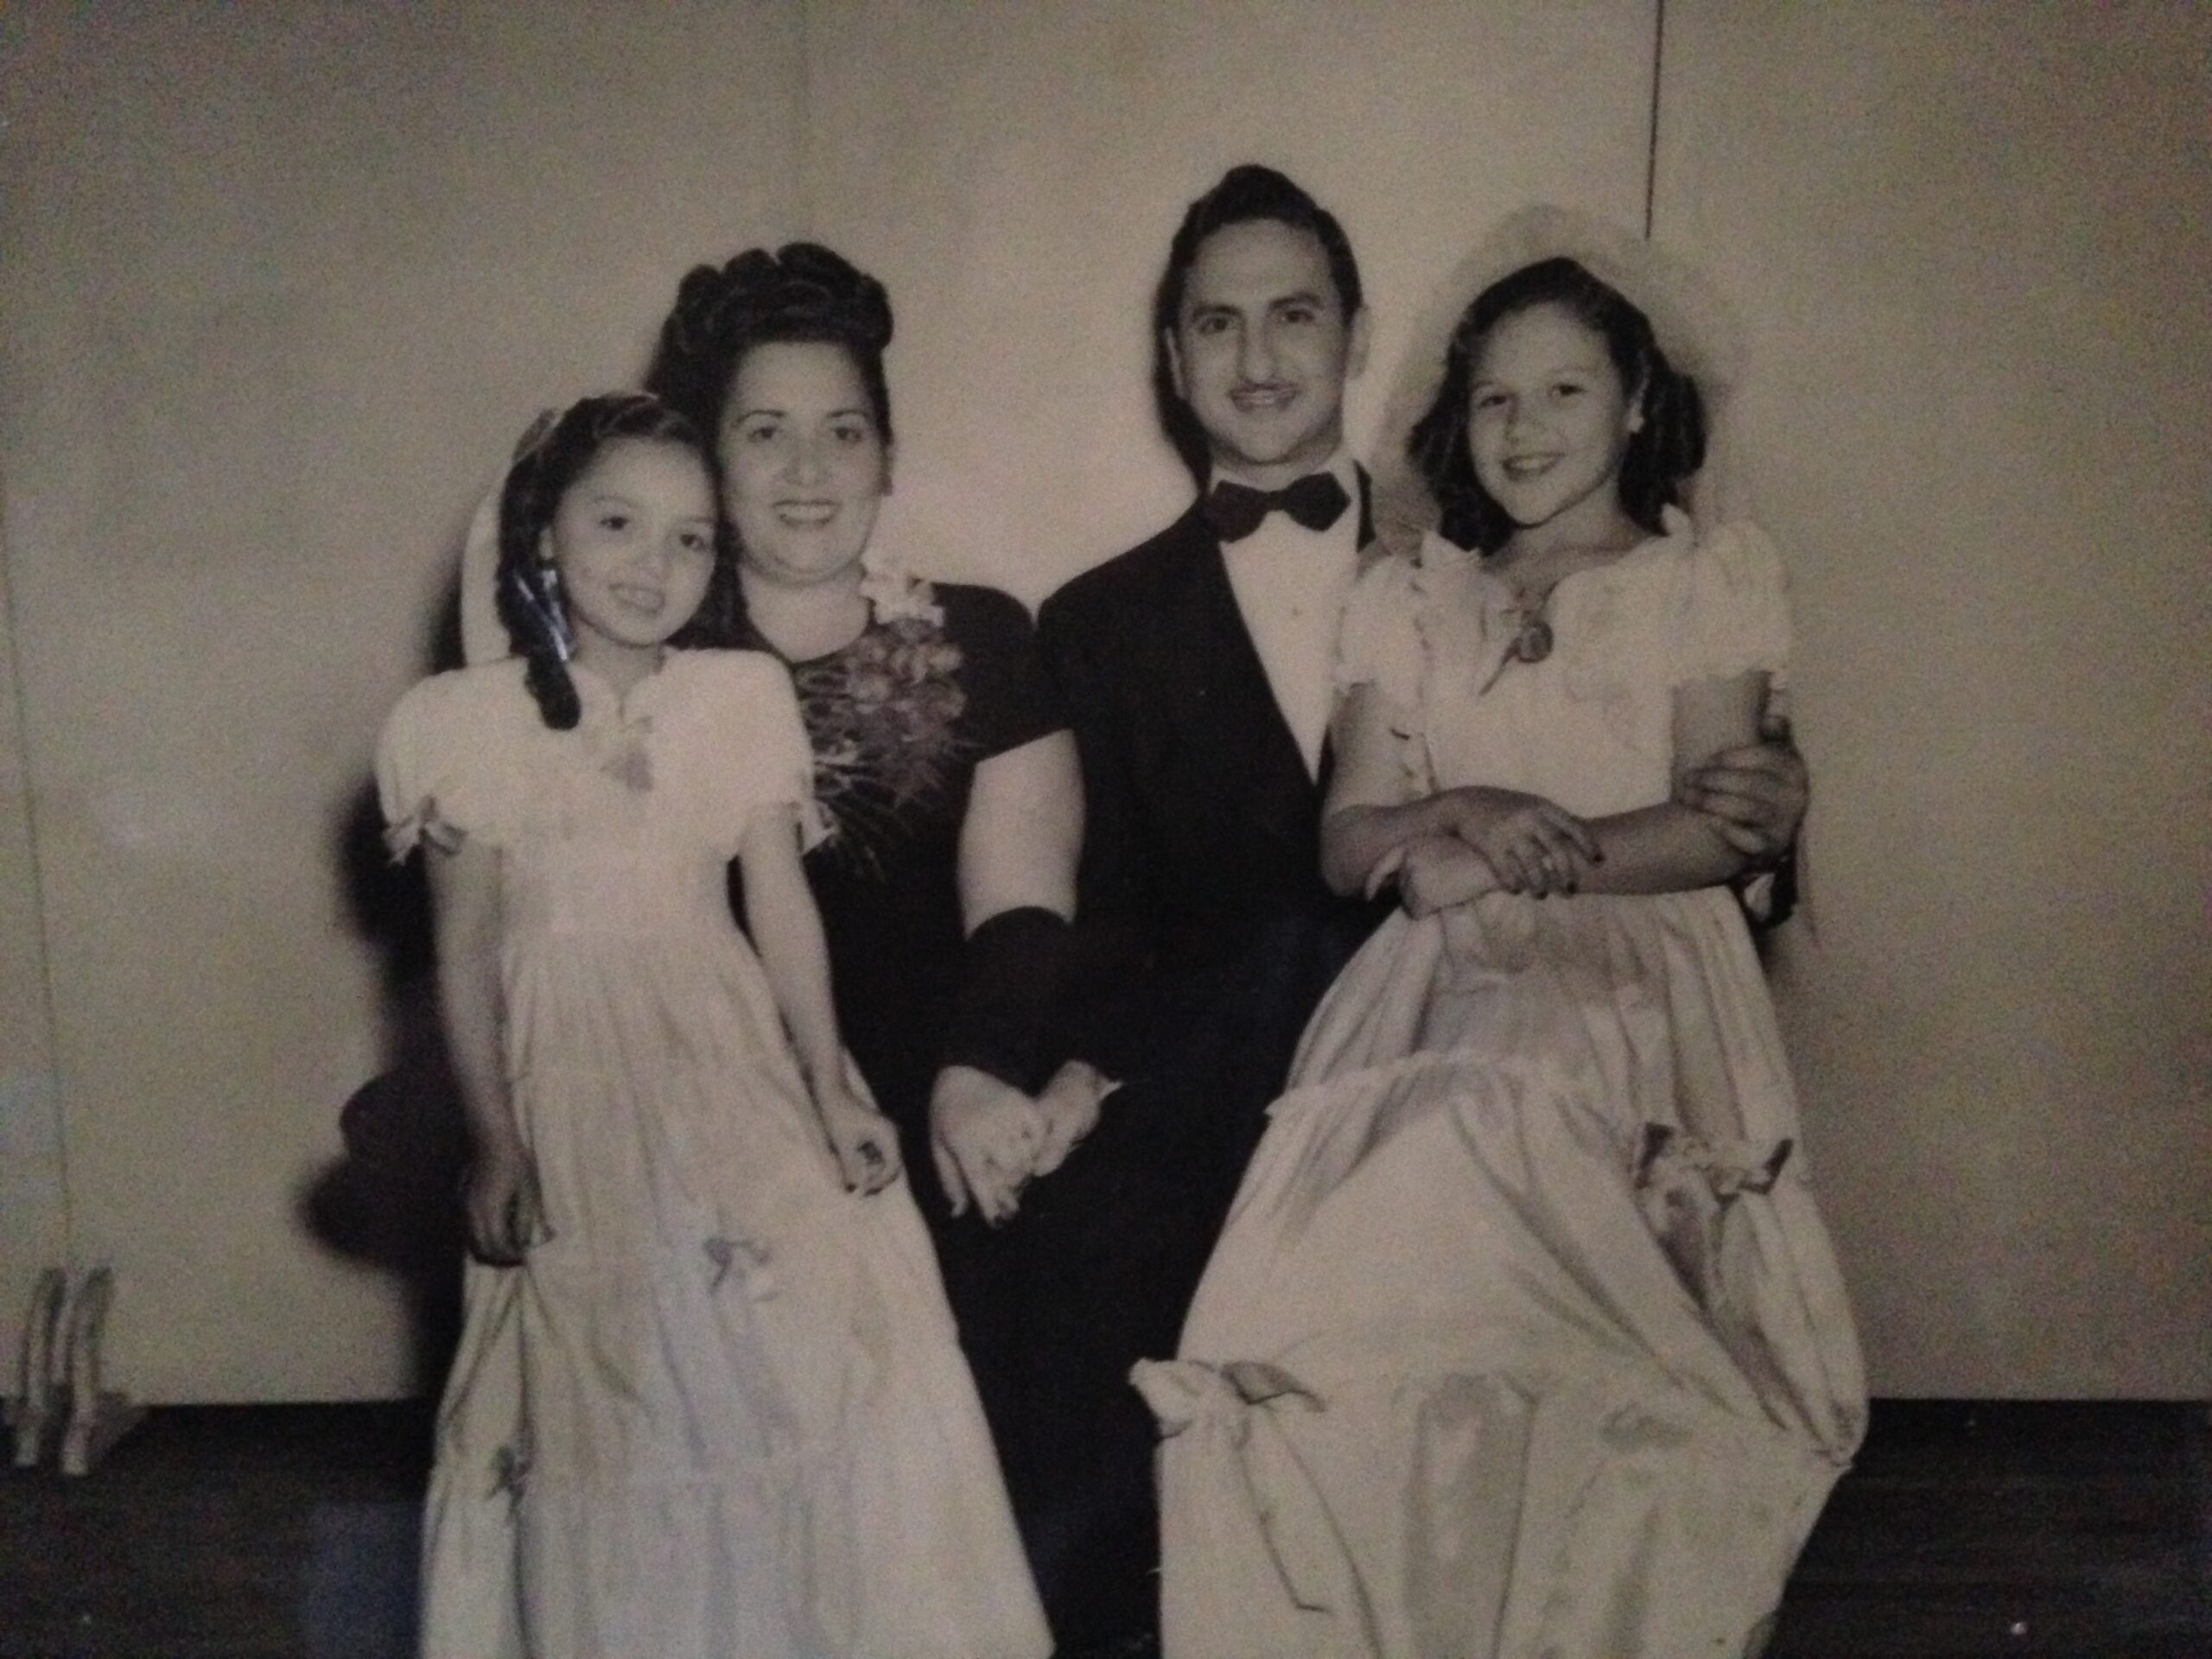 A black and white photo of a man and woman seated, in formal attire, with two young girls in long white dresses. Each girl is seated on the lap of either the man or the woman.